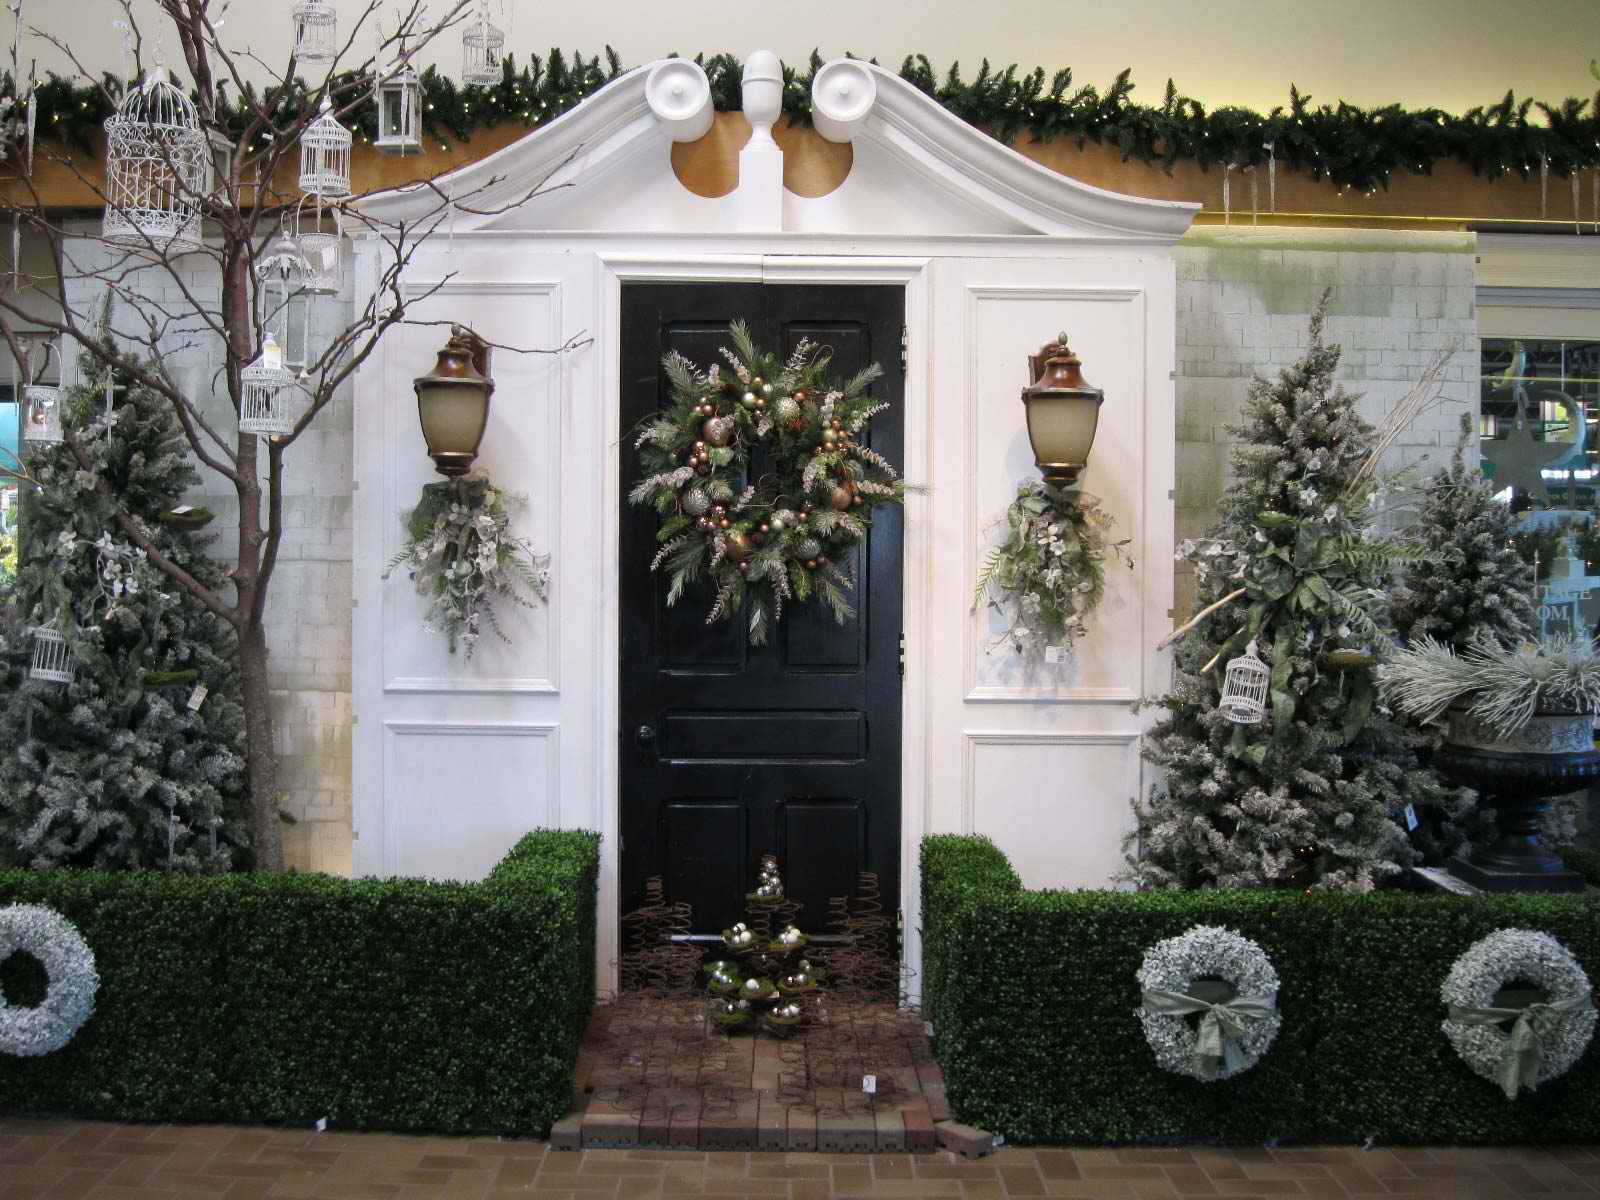 Adorn Hedges With Shimmery Wreaths